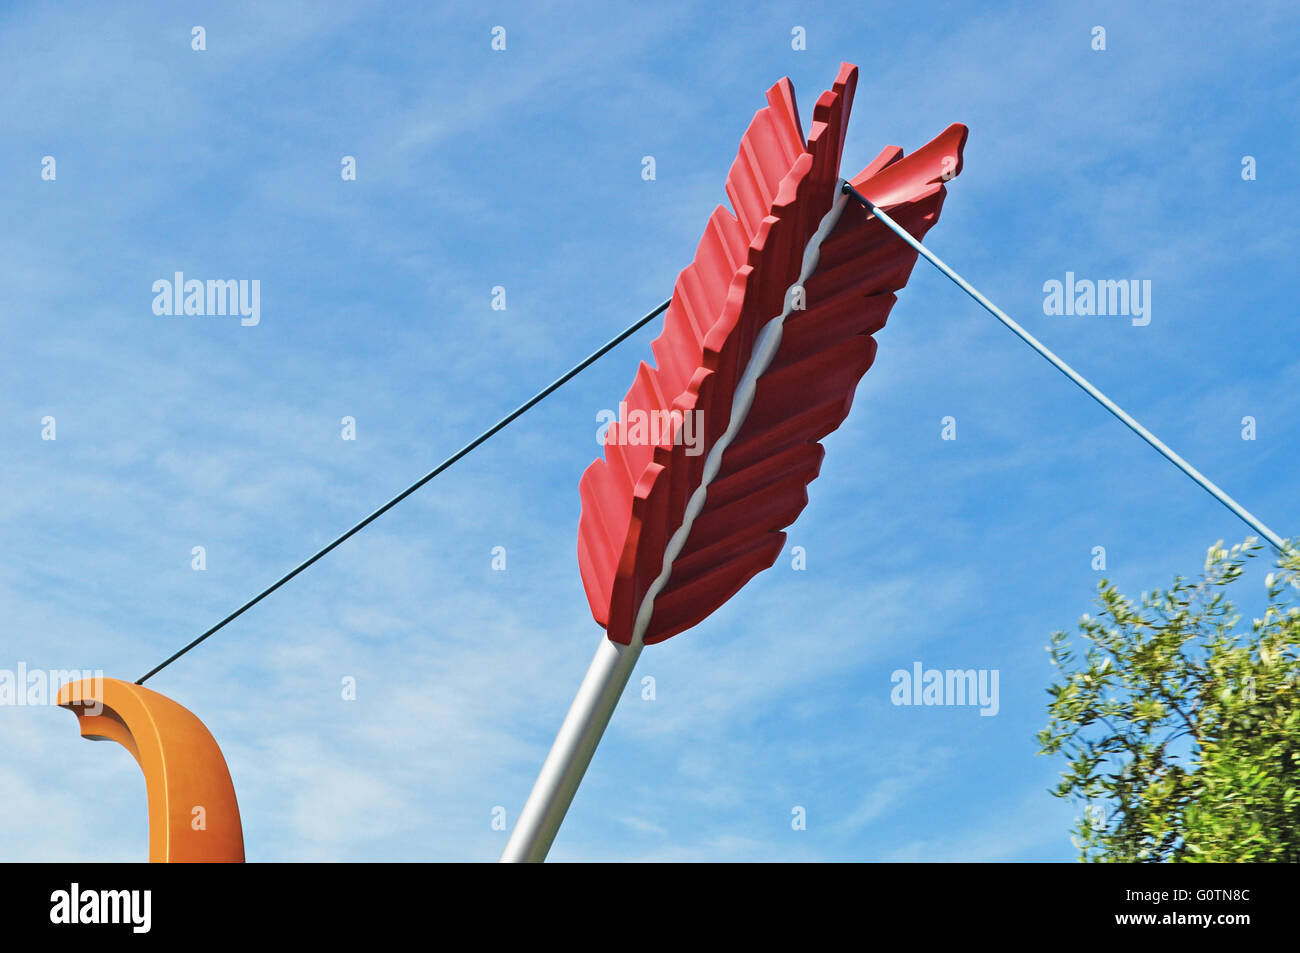 San Francisco, Usa: view of the sculpture Cupid’s Span, a bow and arrow, by the artists Claes Oldenburg and Coosje van Bruggen Stock Photo